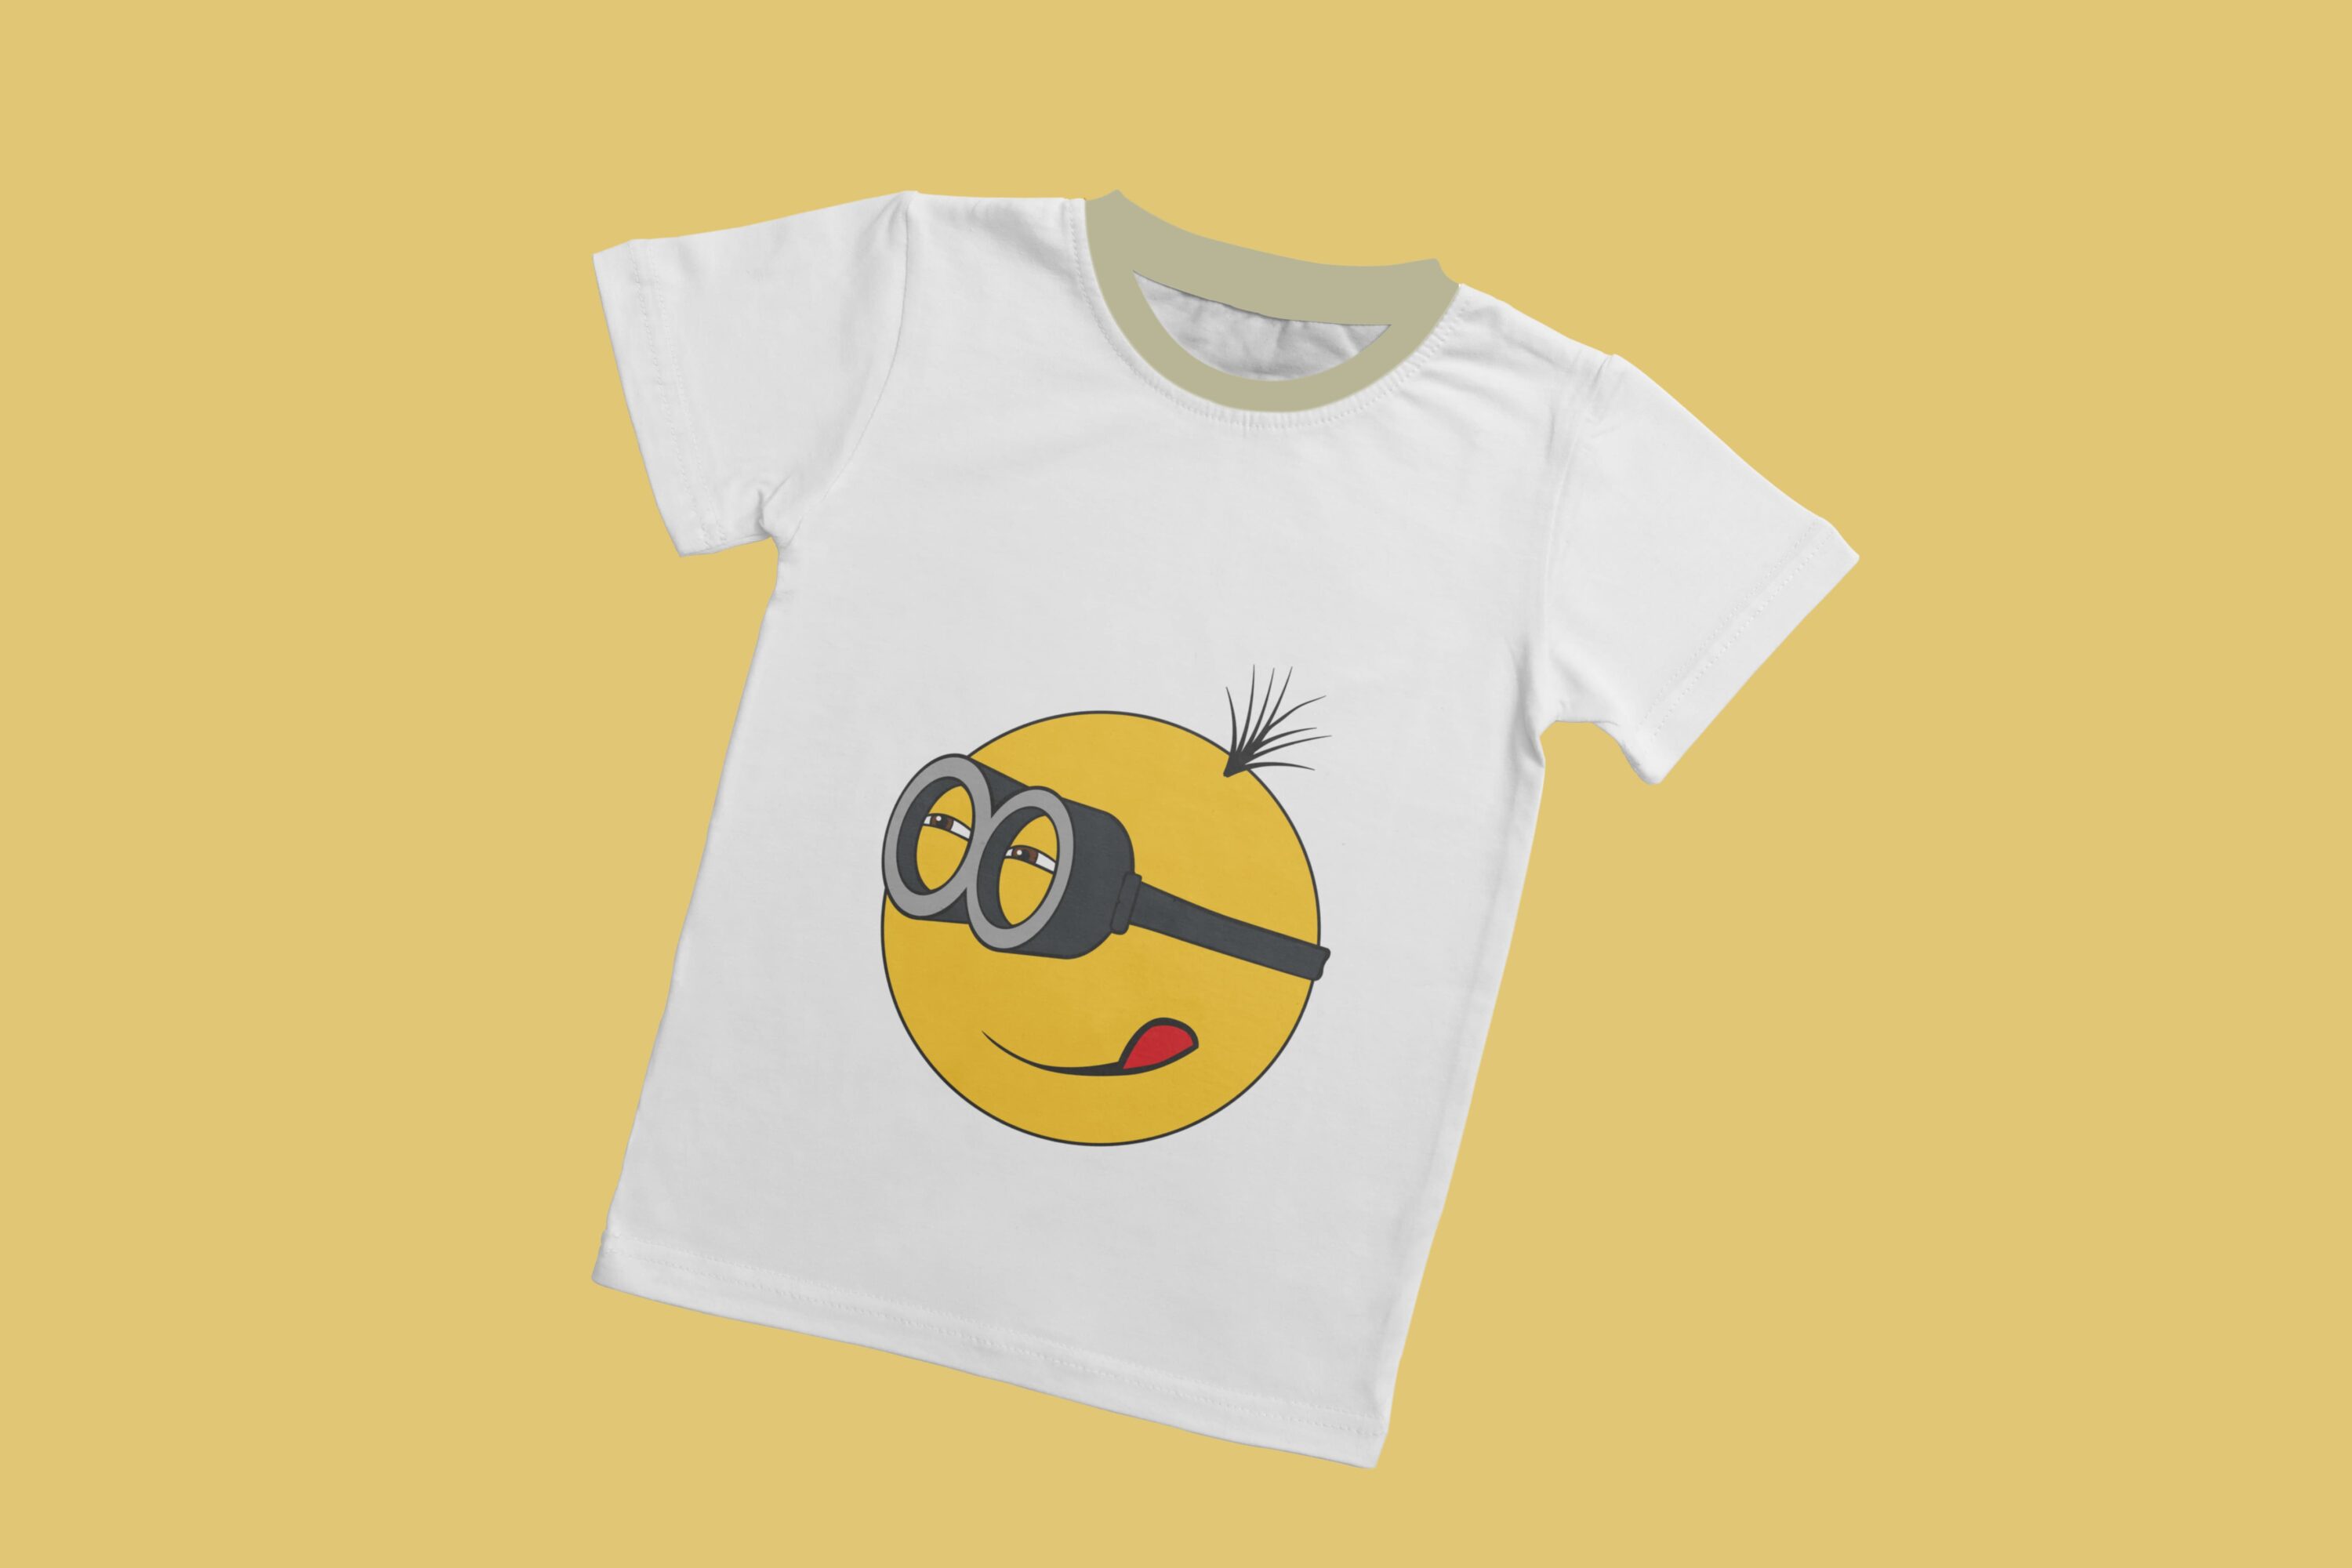 A white T-shirt with a mint collar and a face of an interested minion.